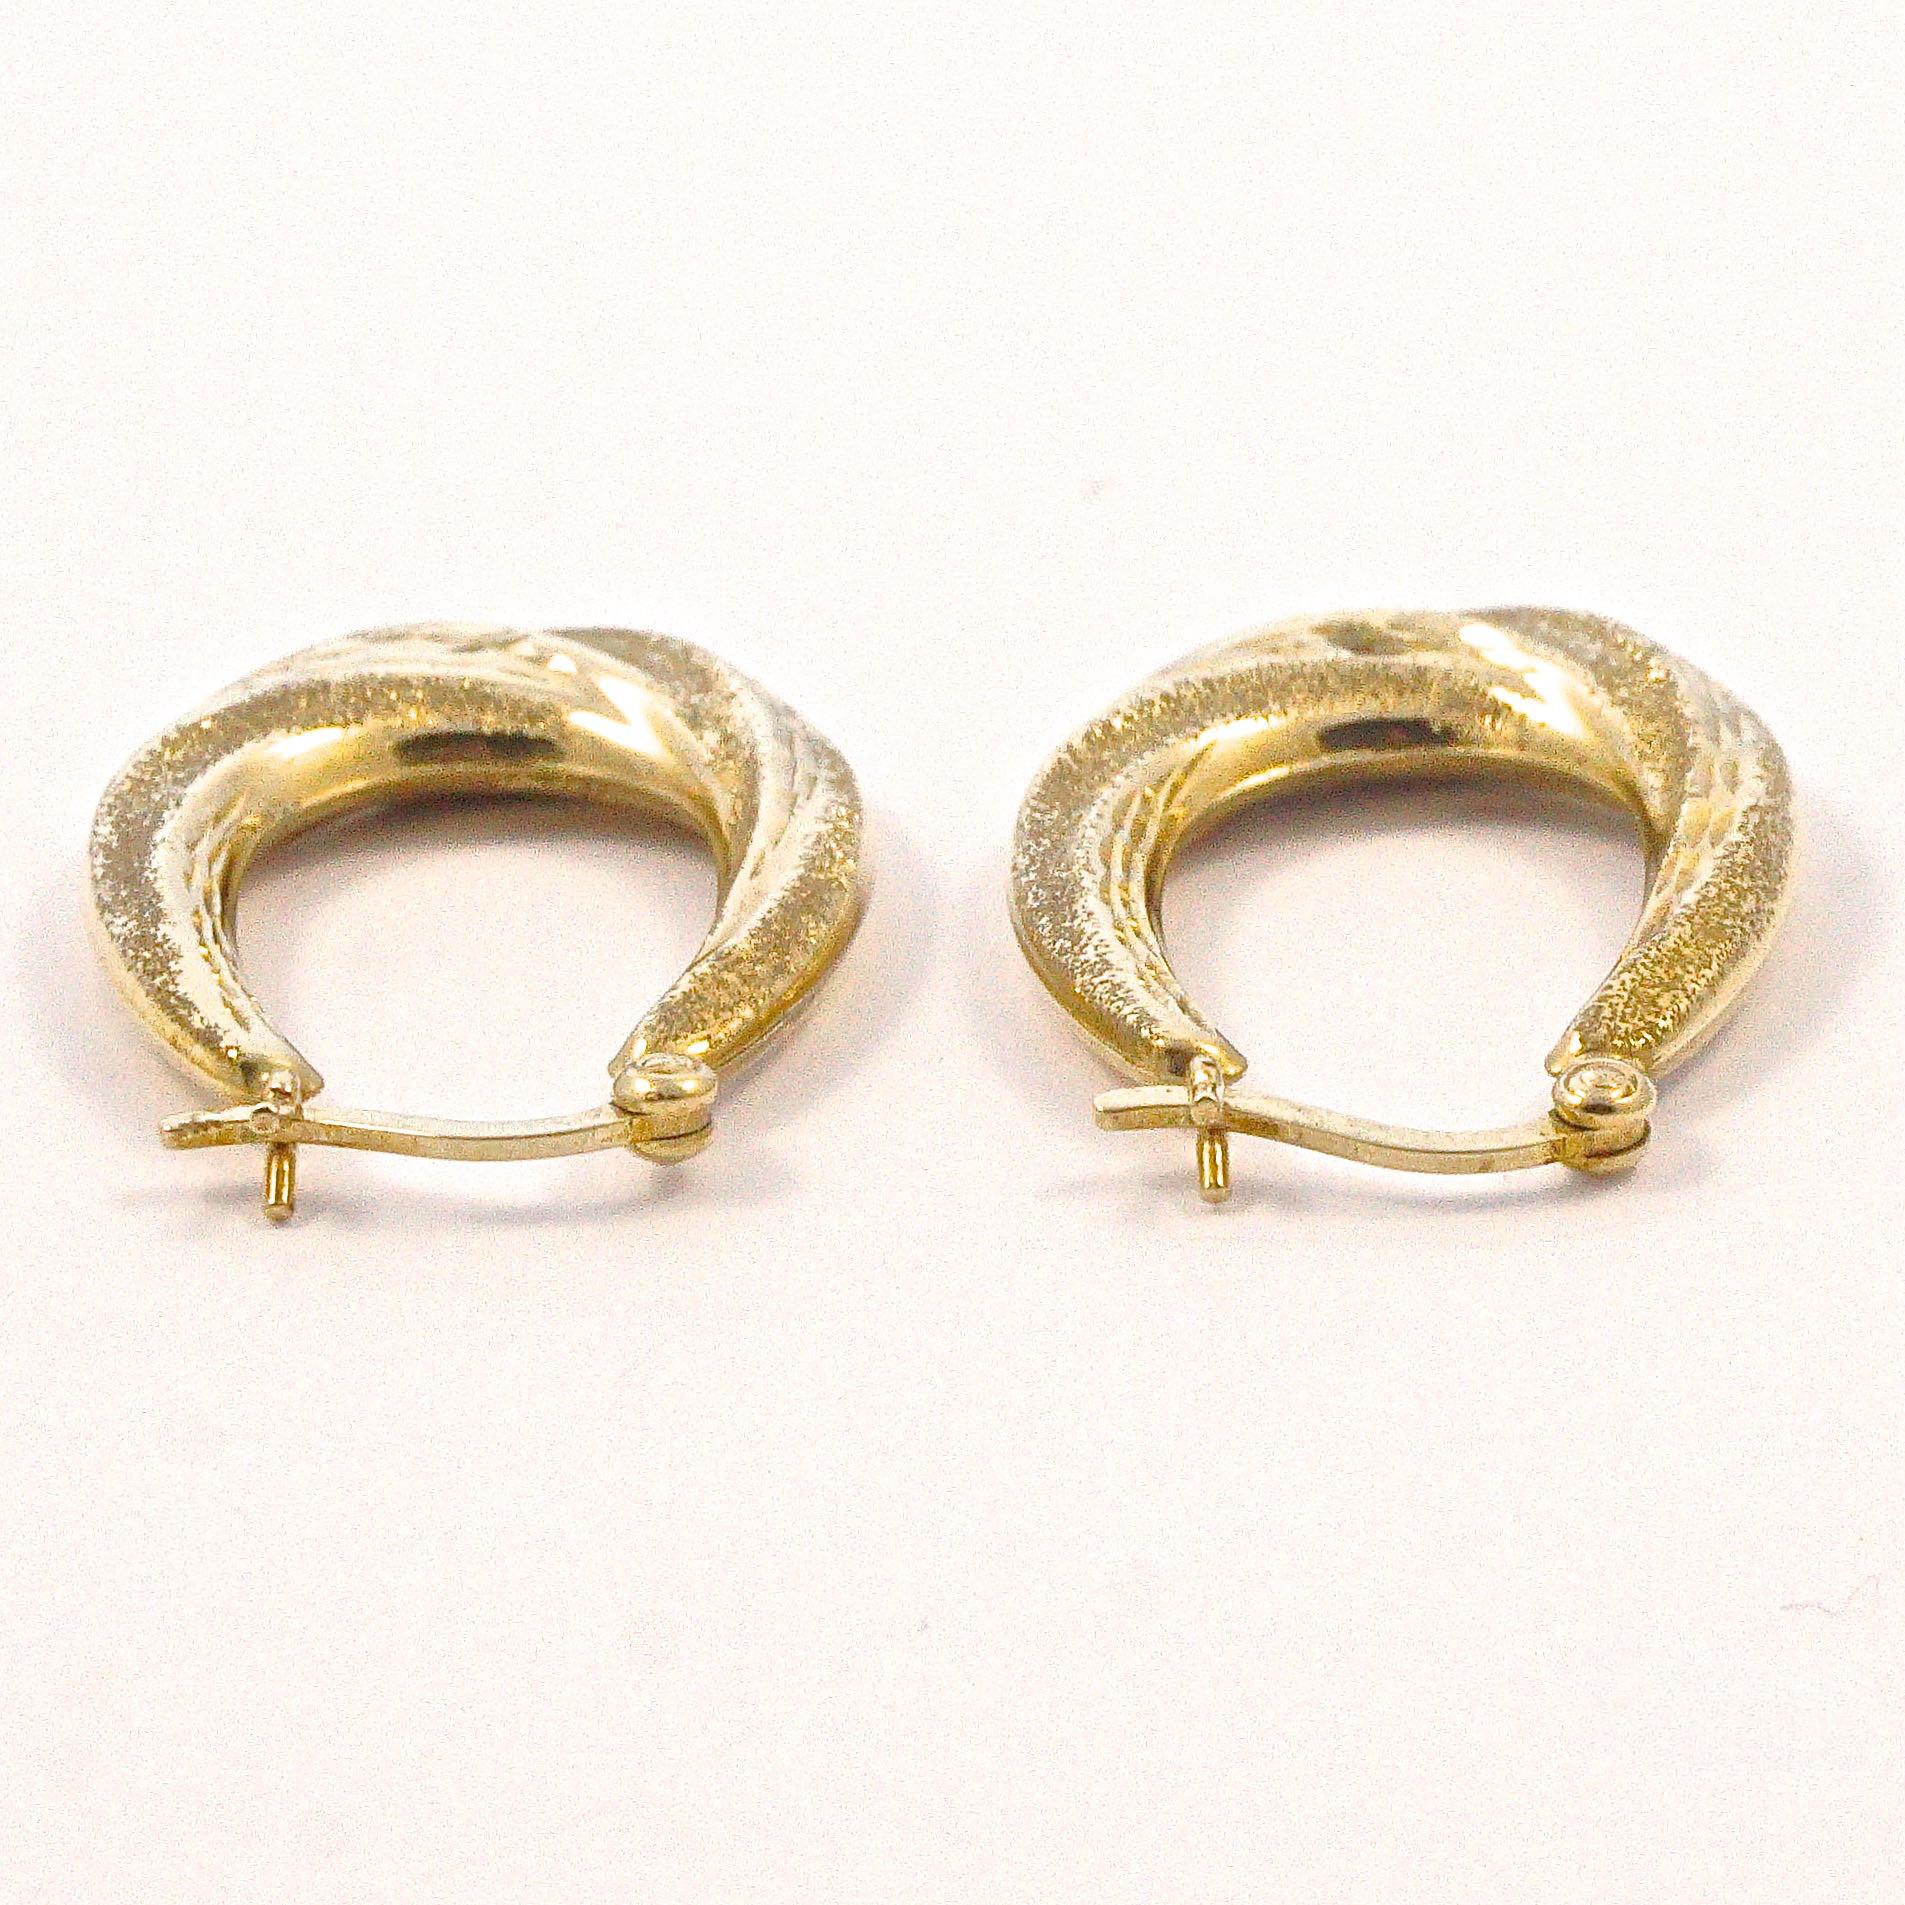 9ct Gold Textured and Diamond Cut Oval Hoop Earrings 2